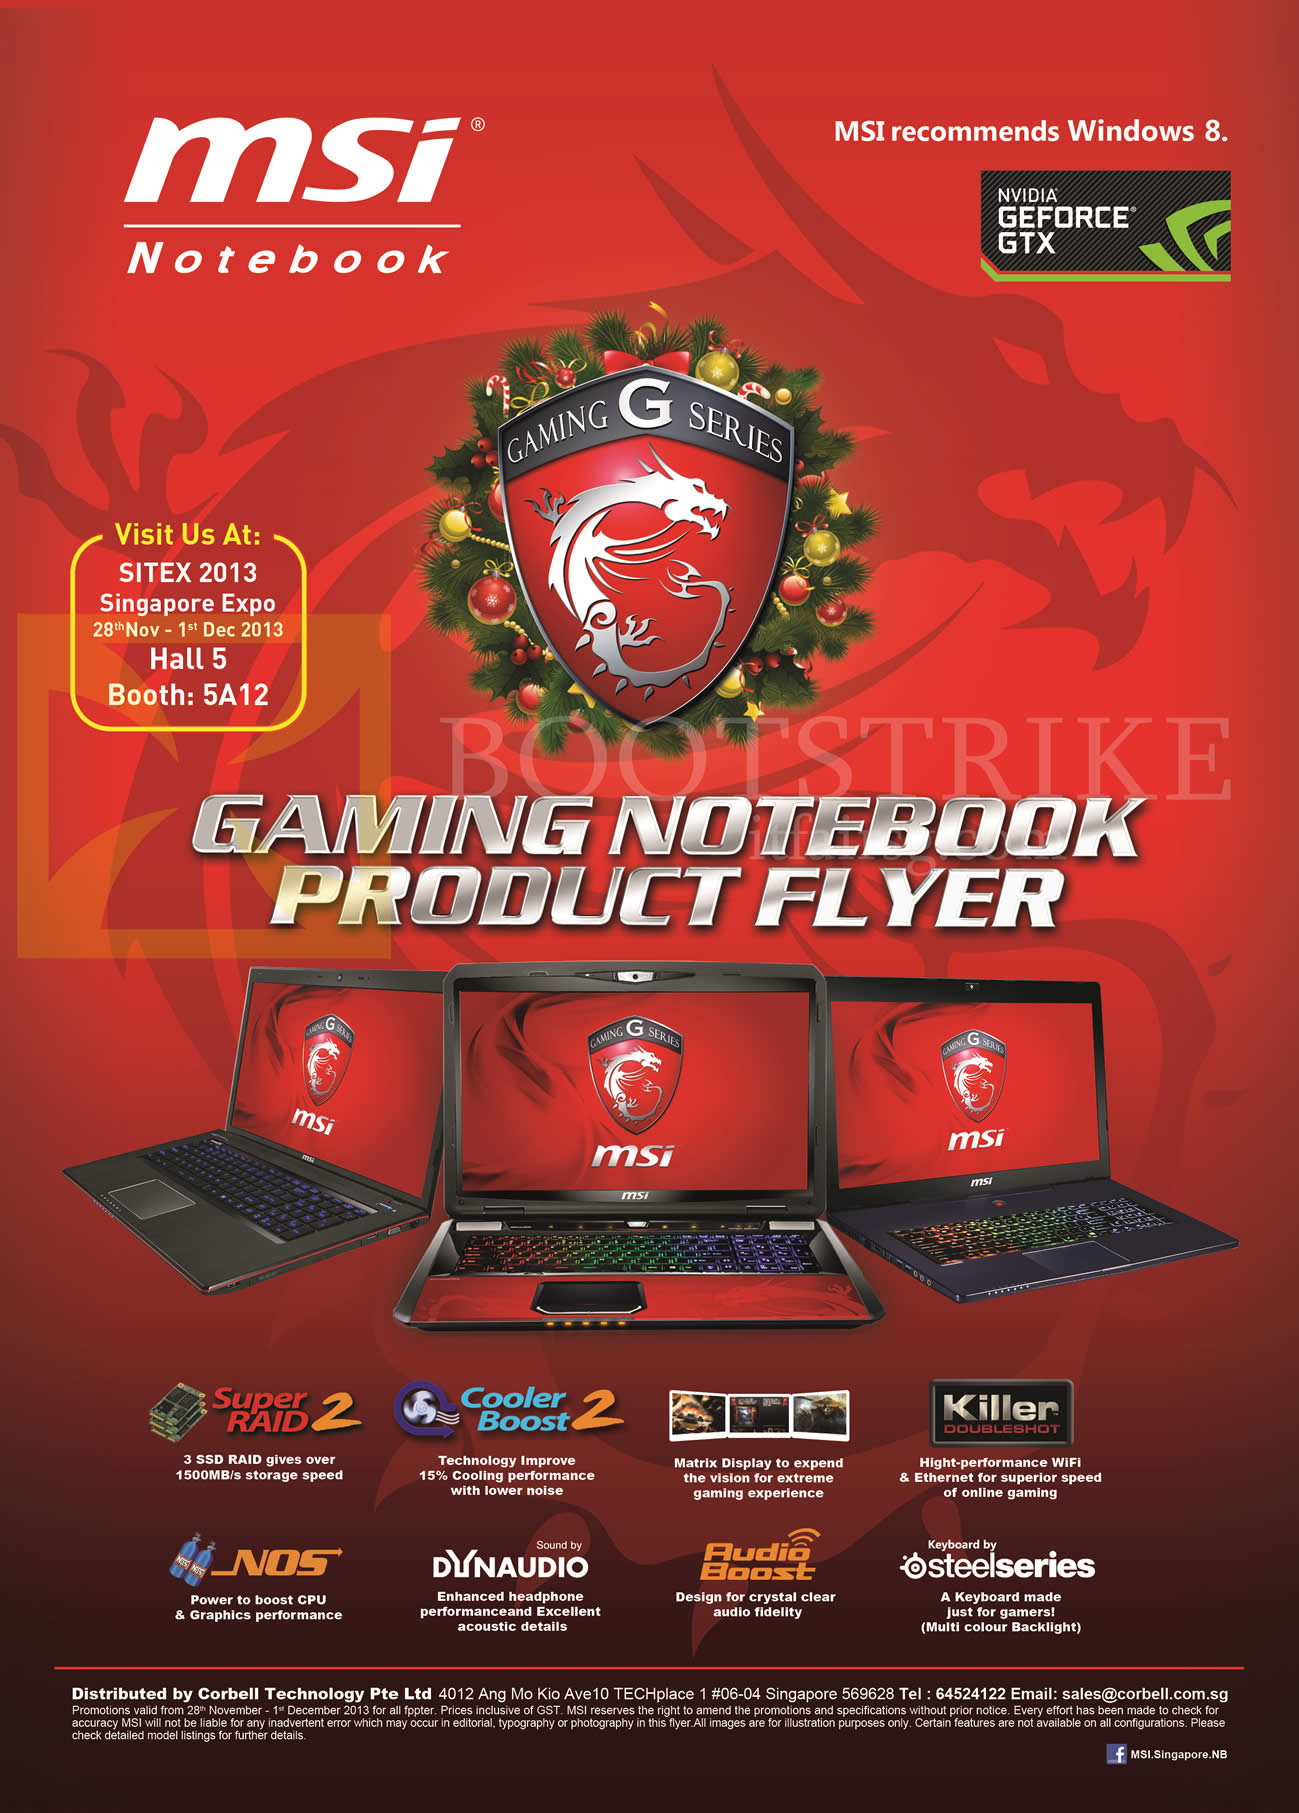 SITEX 2013 price list image brochure of MSI Gaming Notebooks Cover, Features, NOS, Dynaudio, Steelseries Keyboard, Killer, Raid, SSD